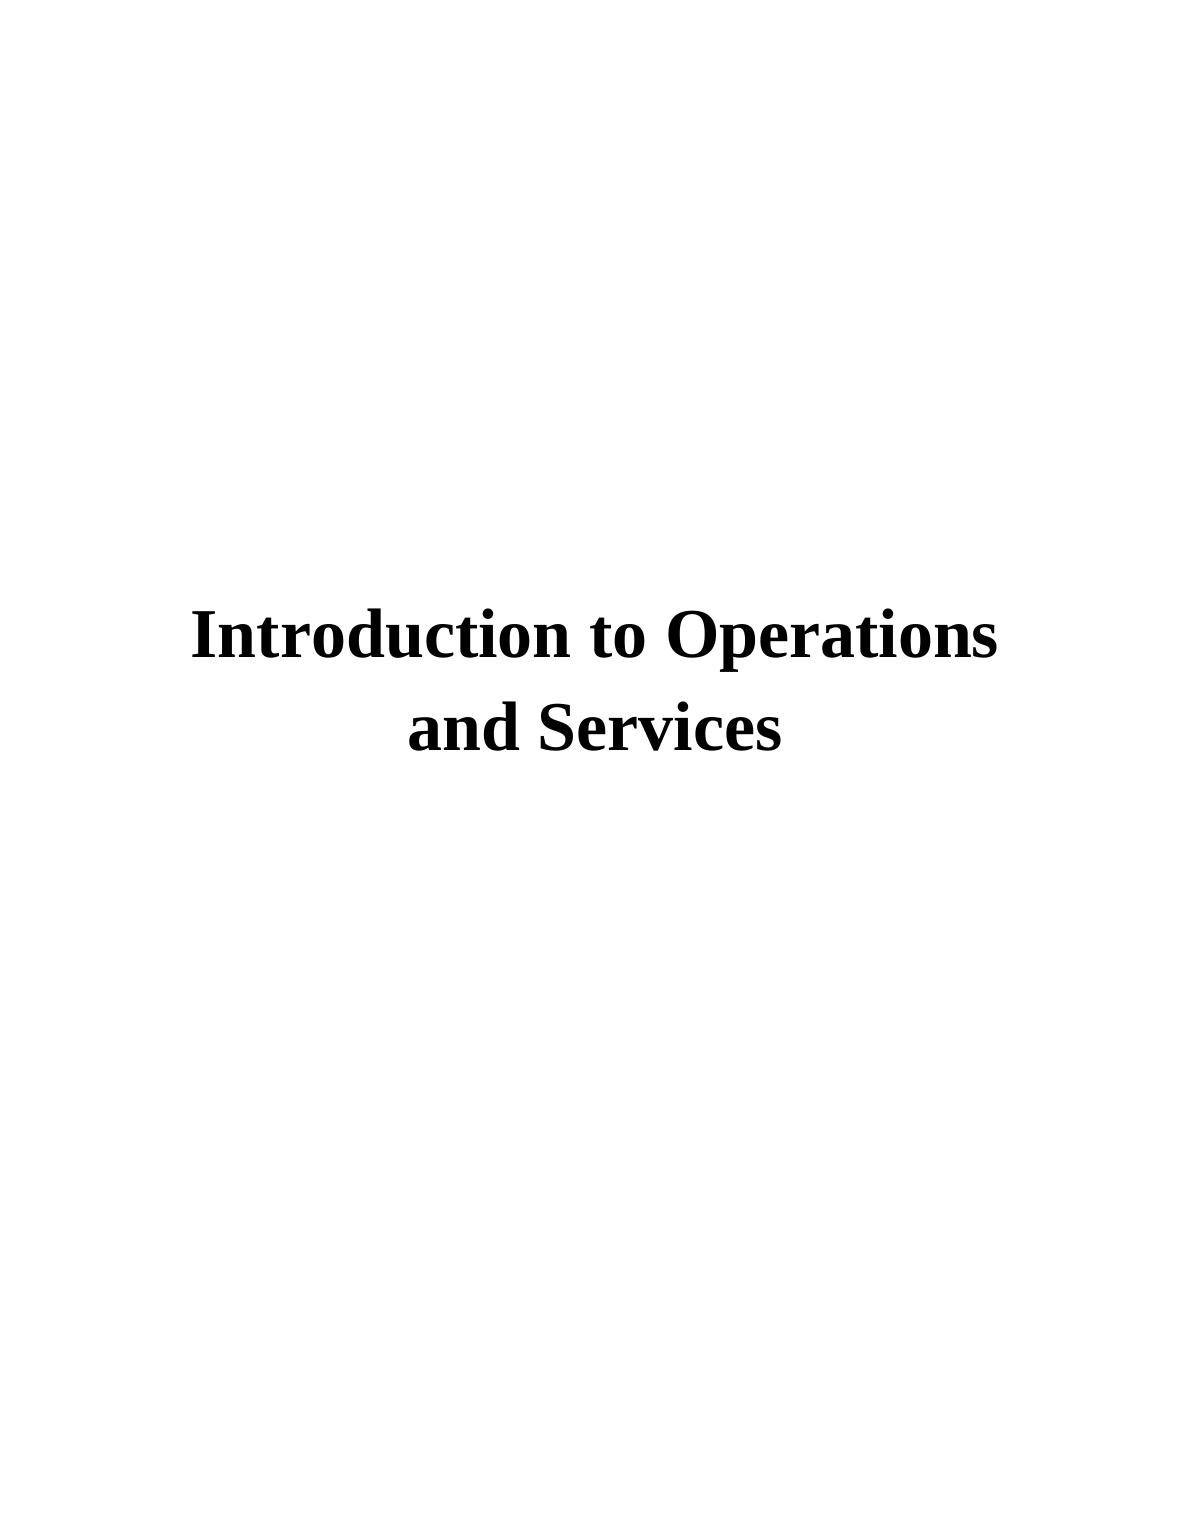 Operations and Services in Mercedes-Benz: Strategies for Improvement_1